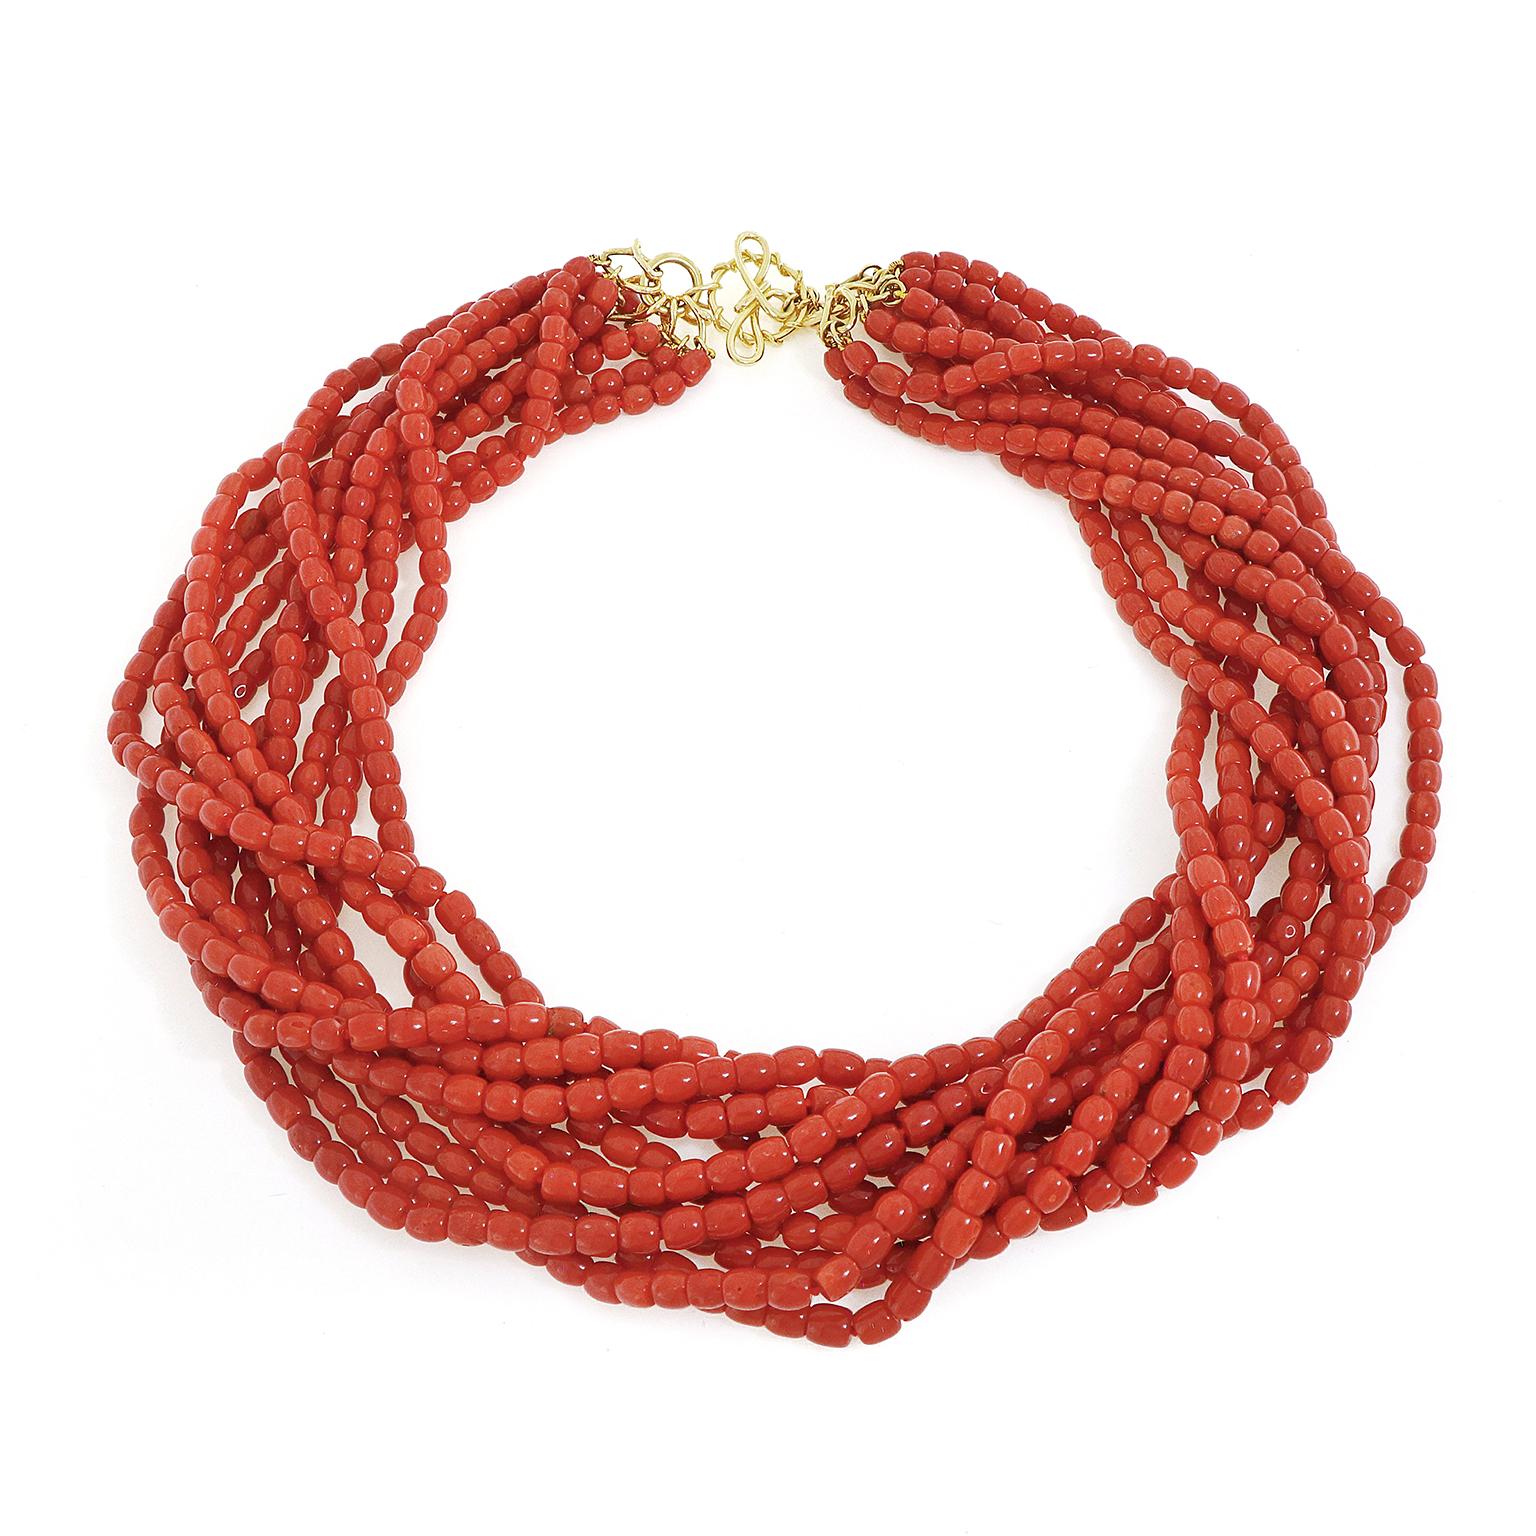 Bead Ten Strand Sardinian Red Coral 18K Yellow Gold Necklace For Sale